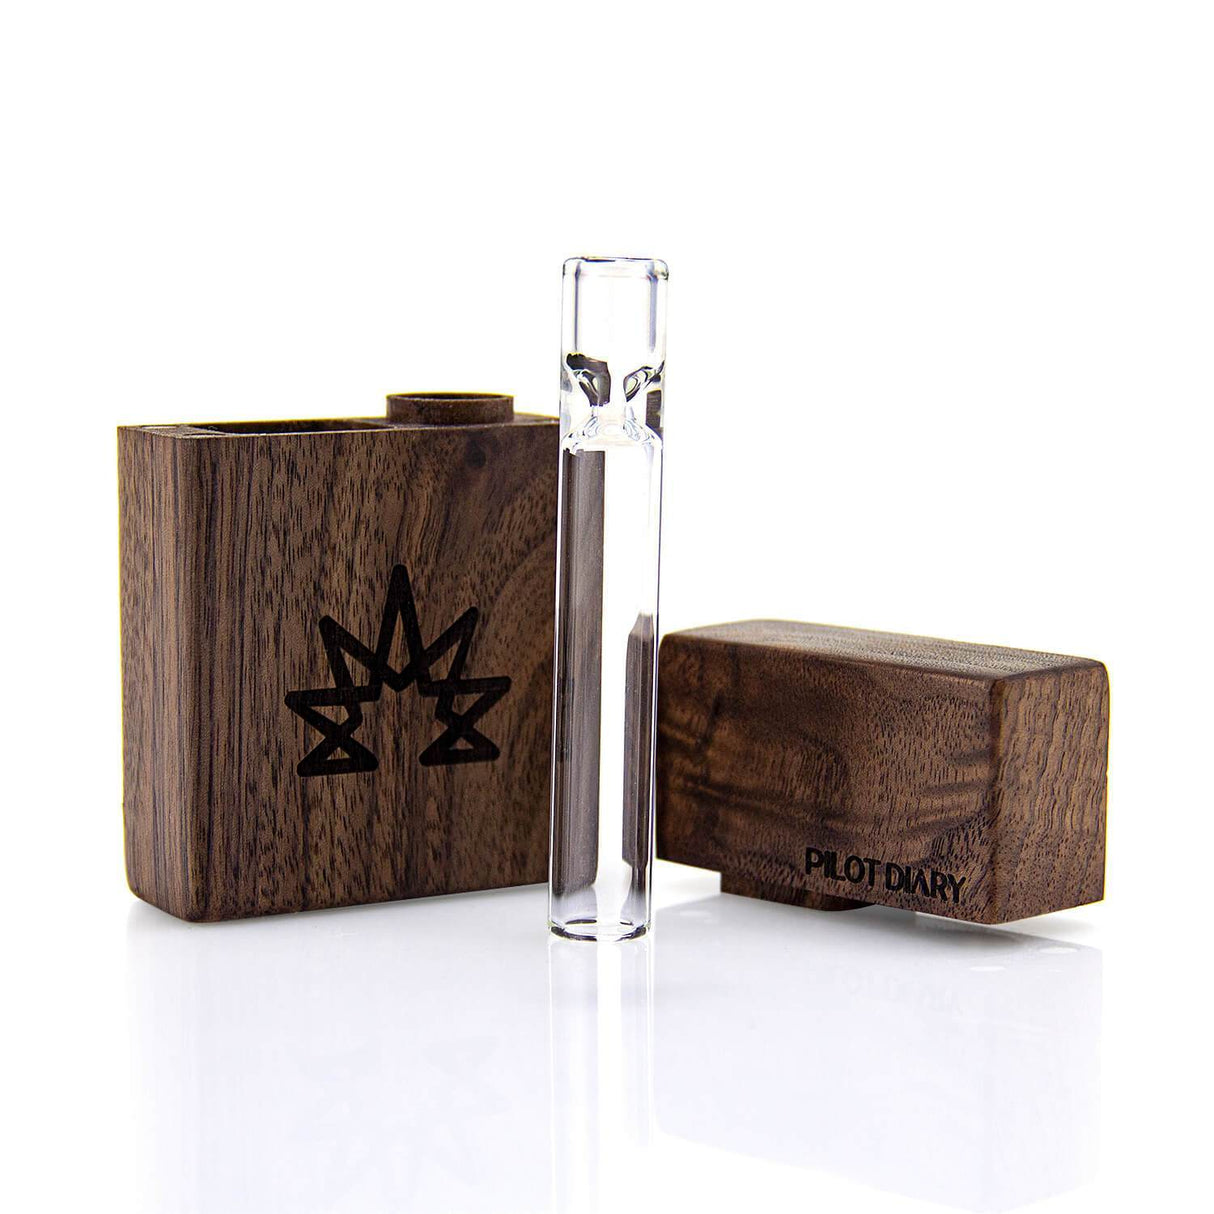 PILOT DIARY Wood Dugout with Engraved Leaf Design and Glass One Hitter Pipe